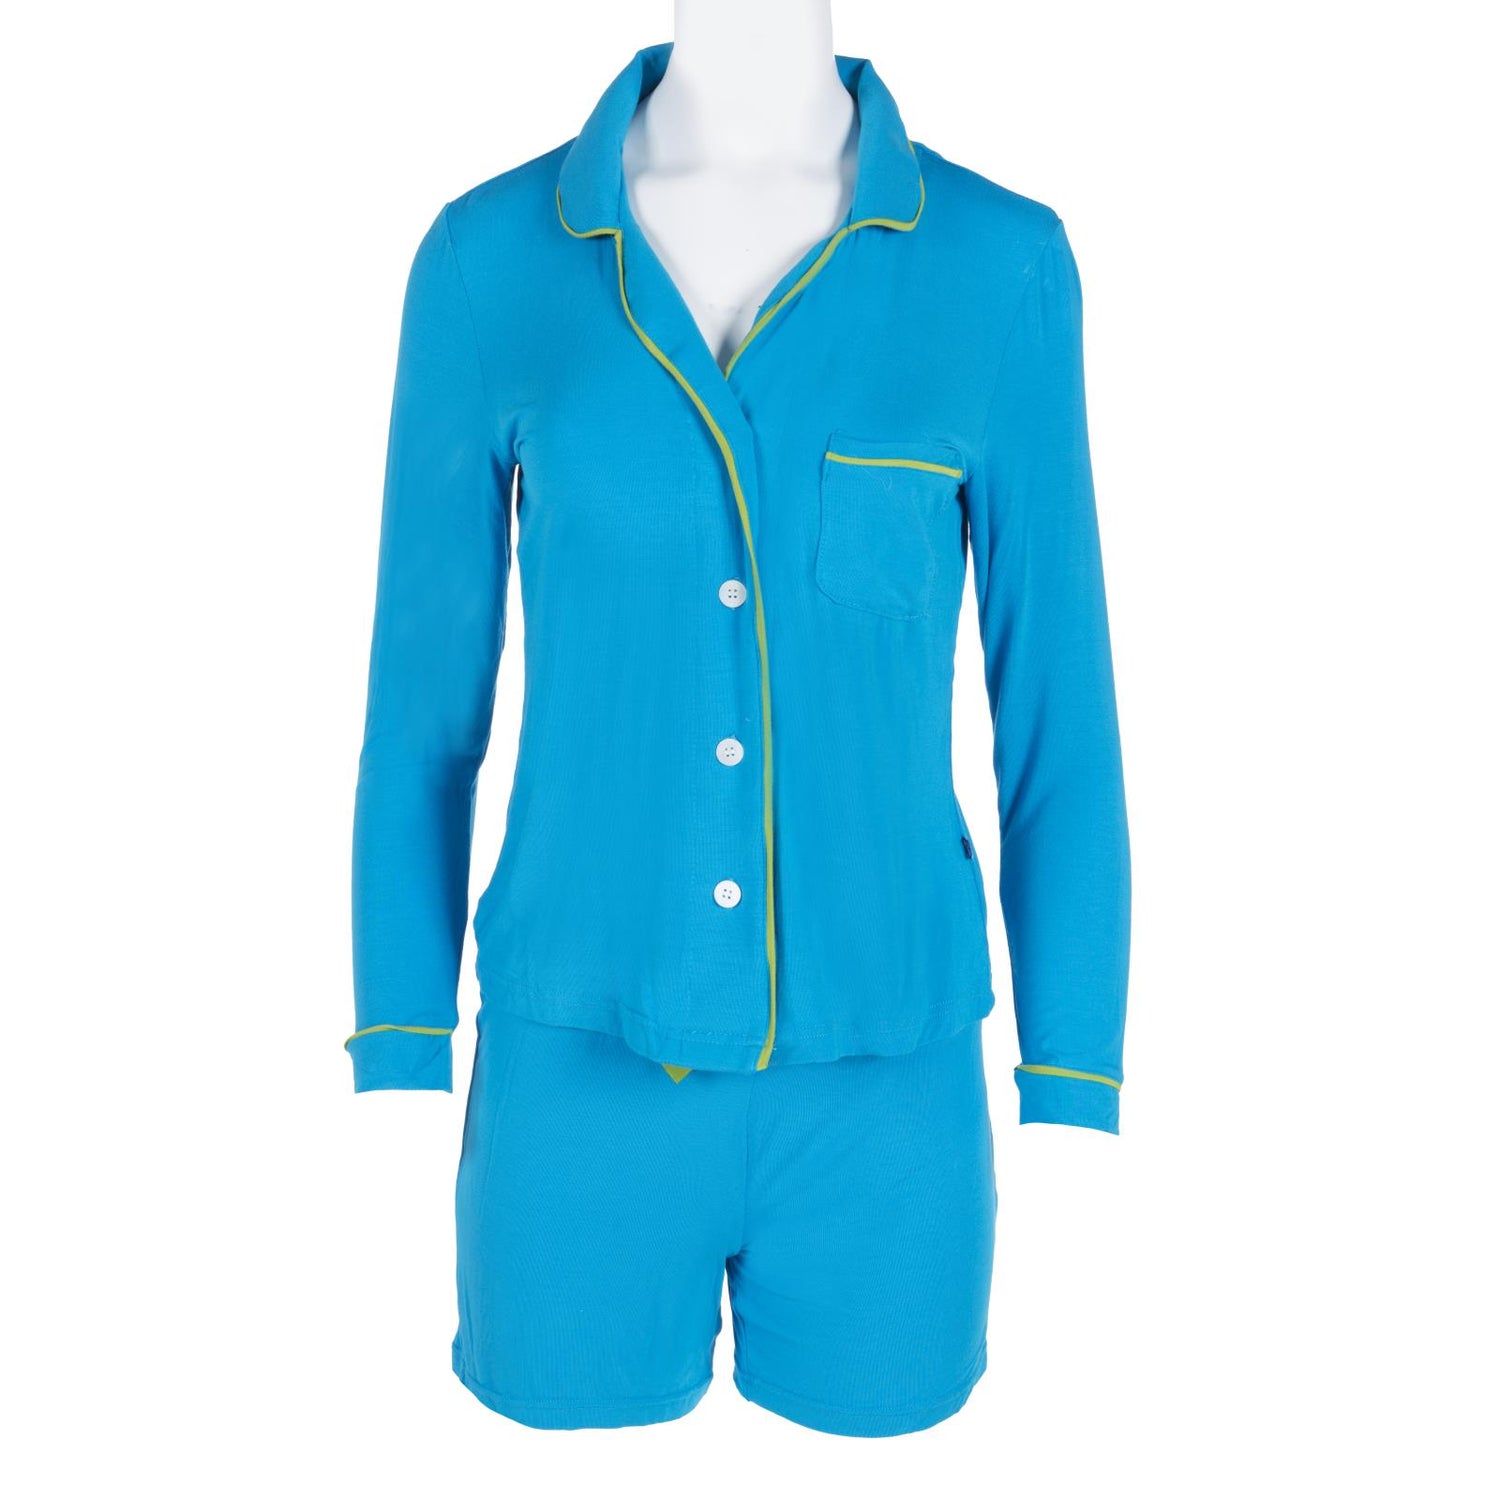 Women's Collared Pajama Set with Shorts in Amazon with Meadow Trim